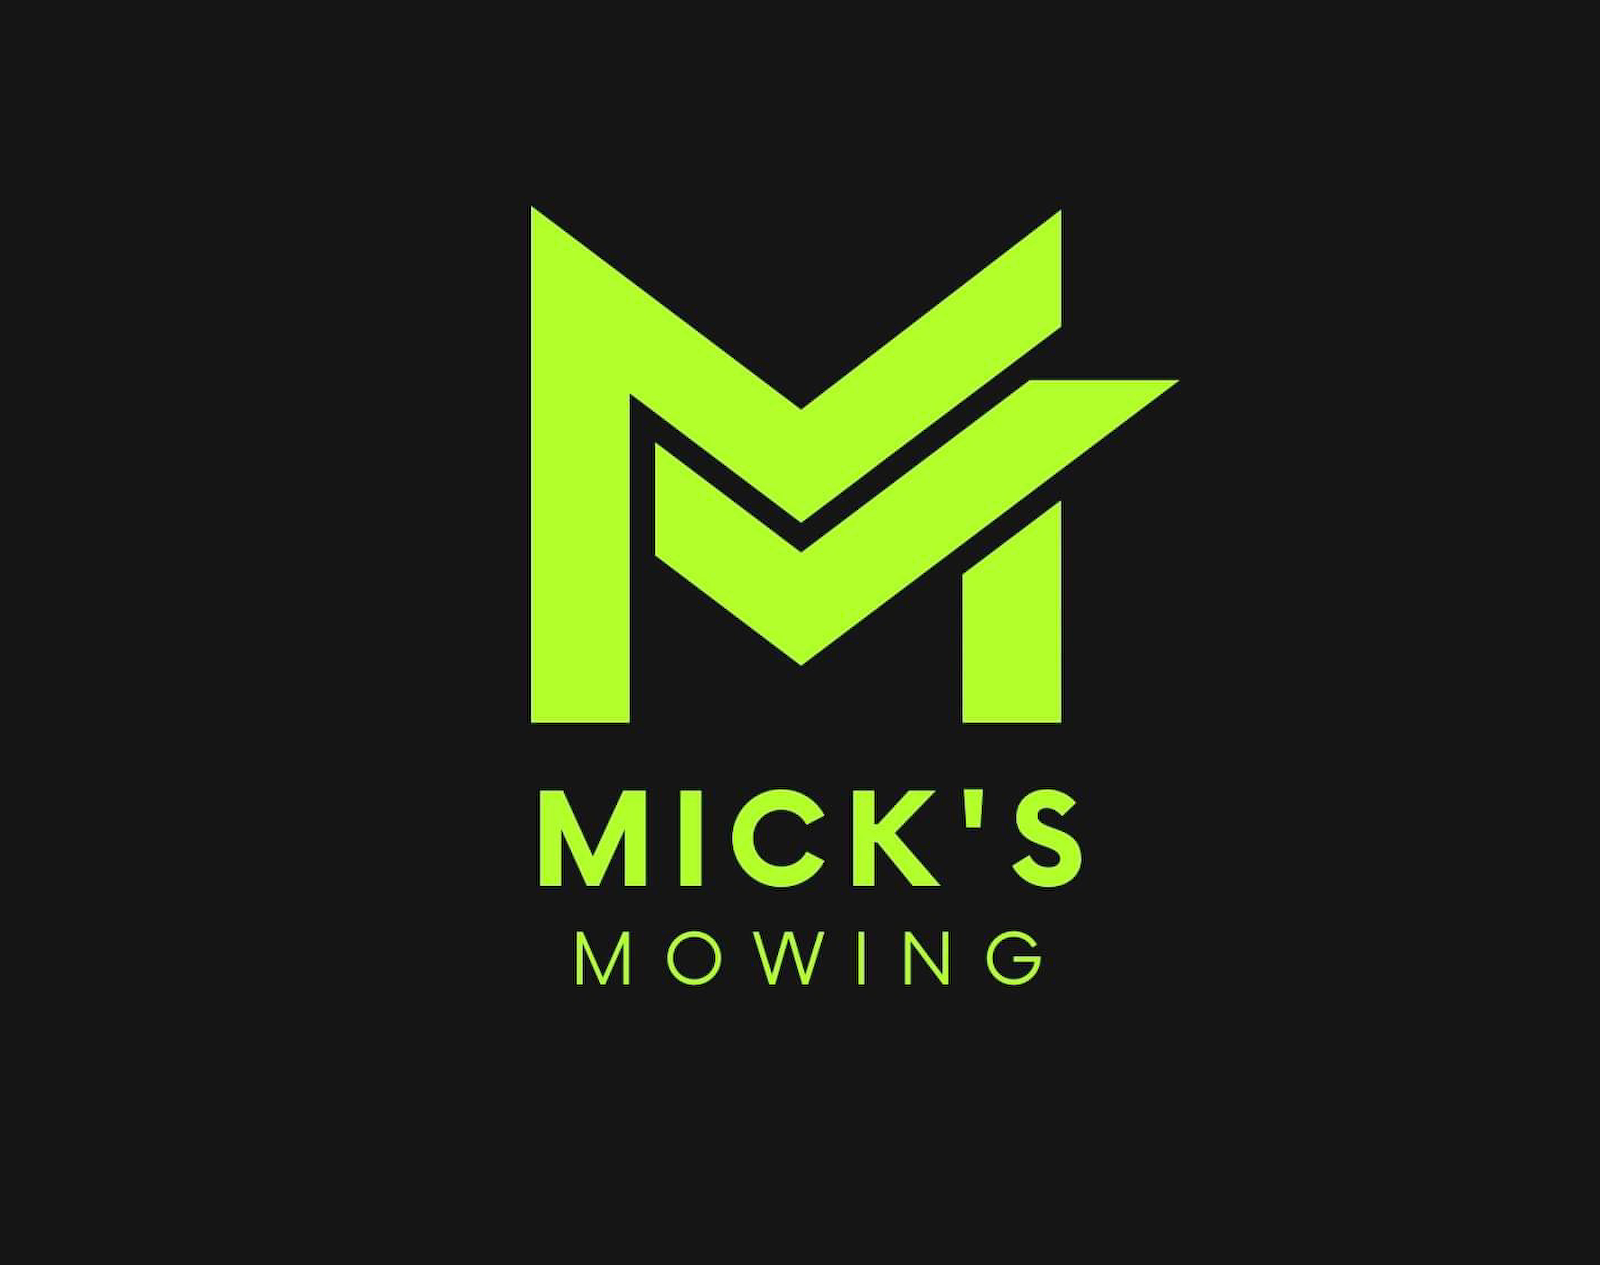 MICK'S MOWING